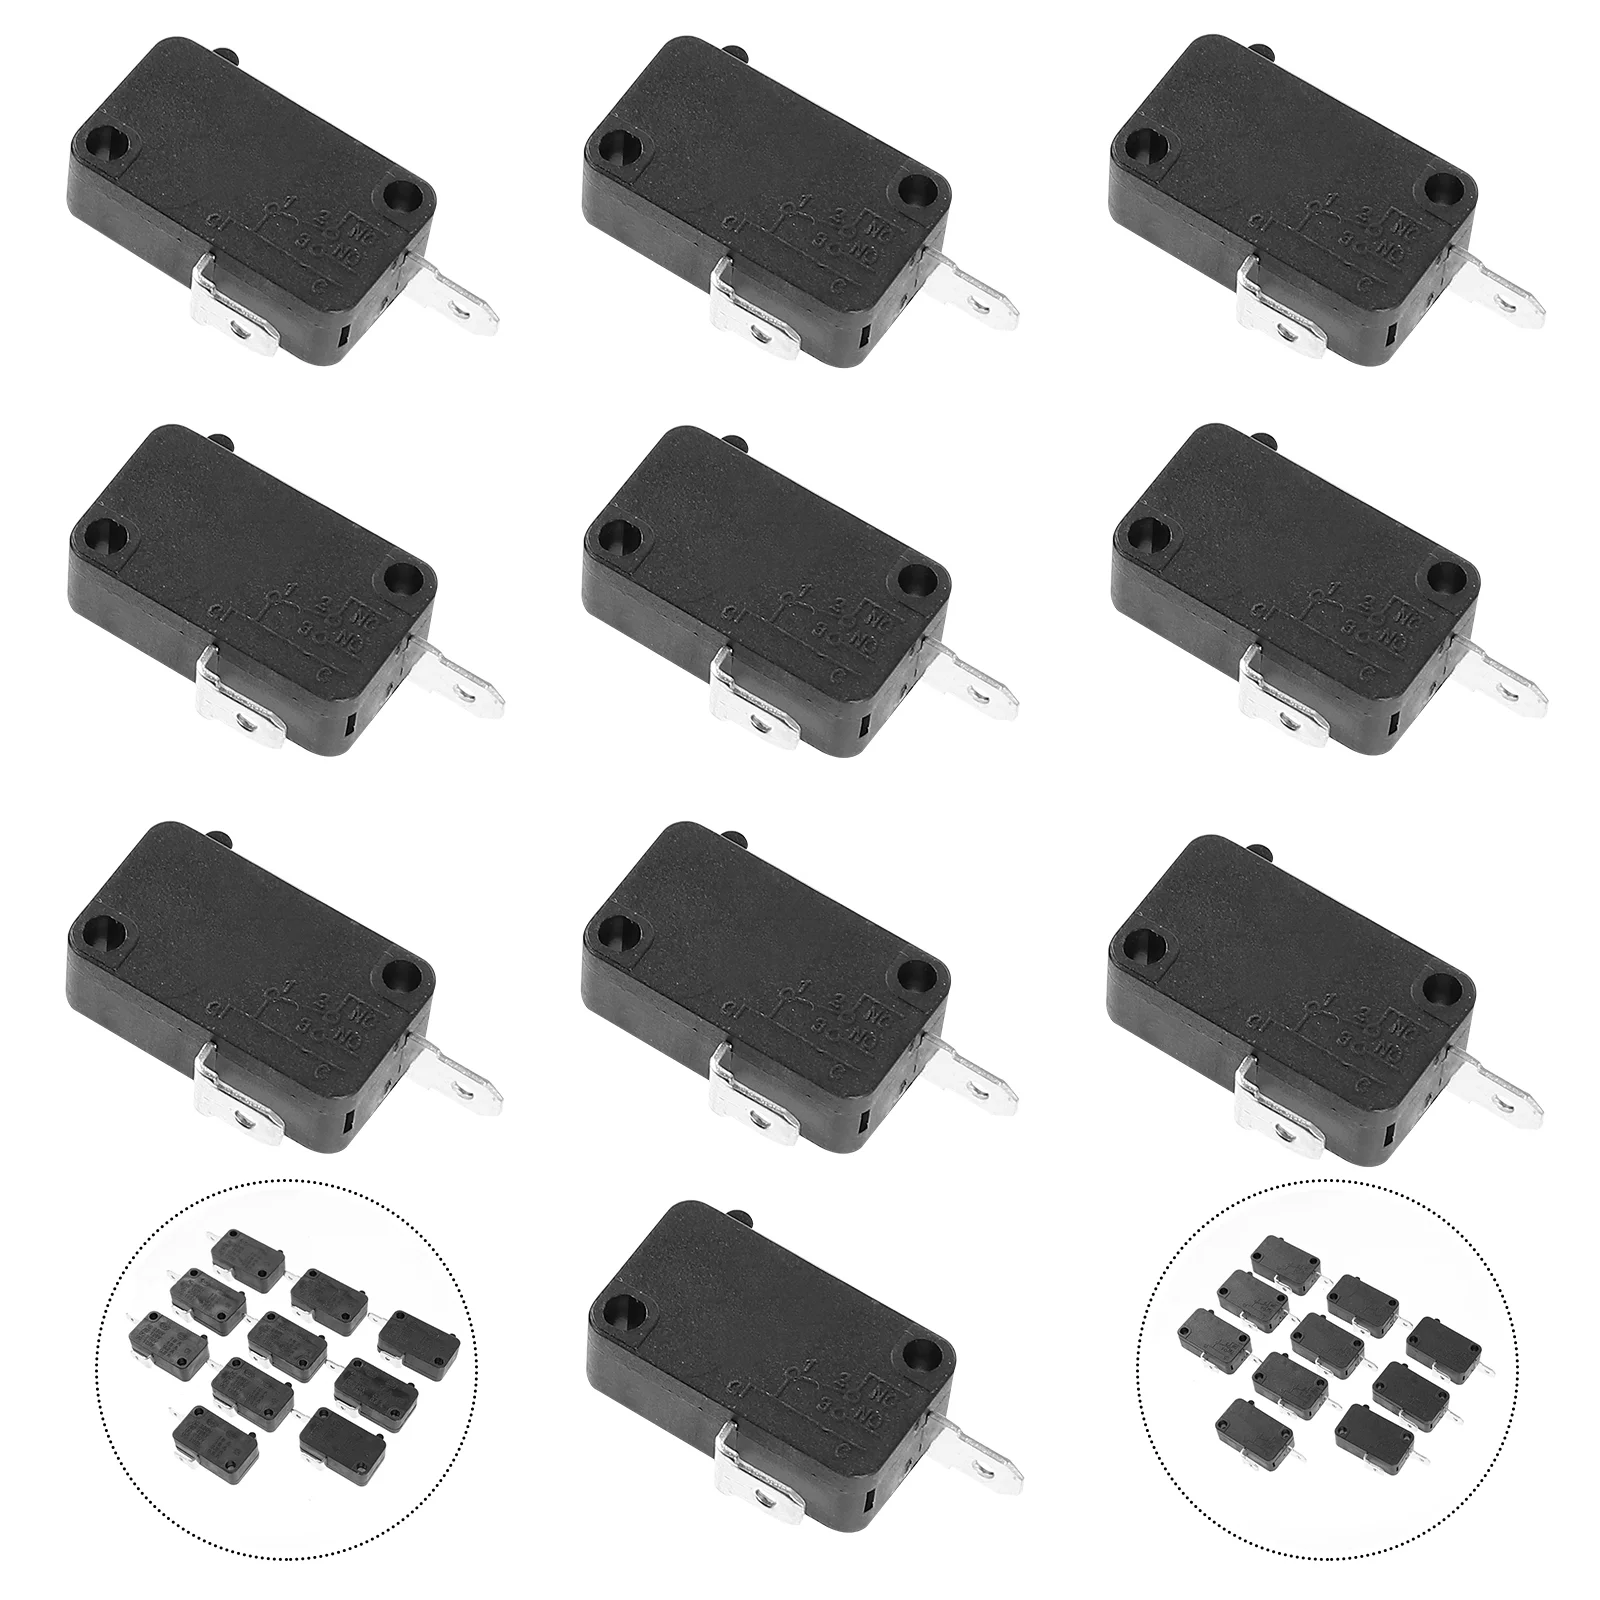 

10 Pcs Microwave Oven Switch Door Rice Cooker Washing Machine Limit Mini Freezers Normally Close Open